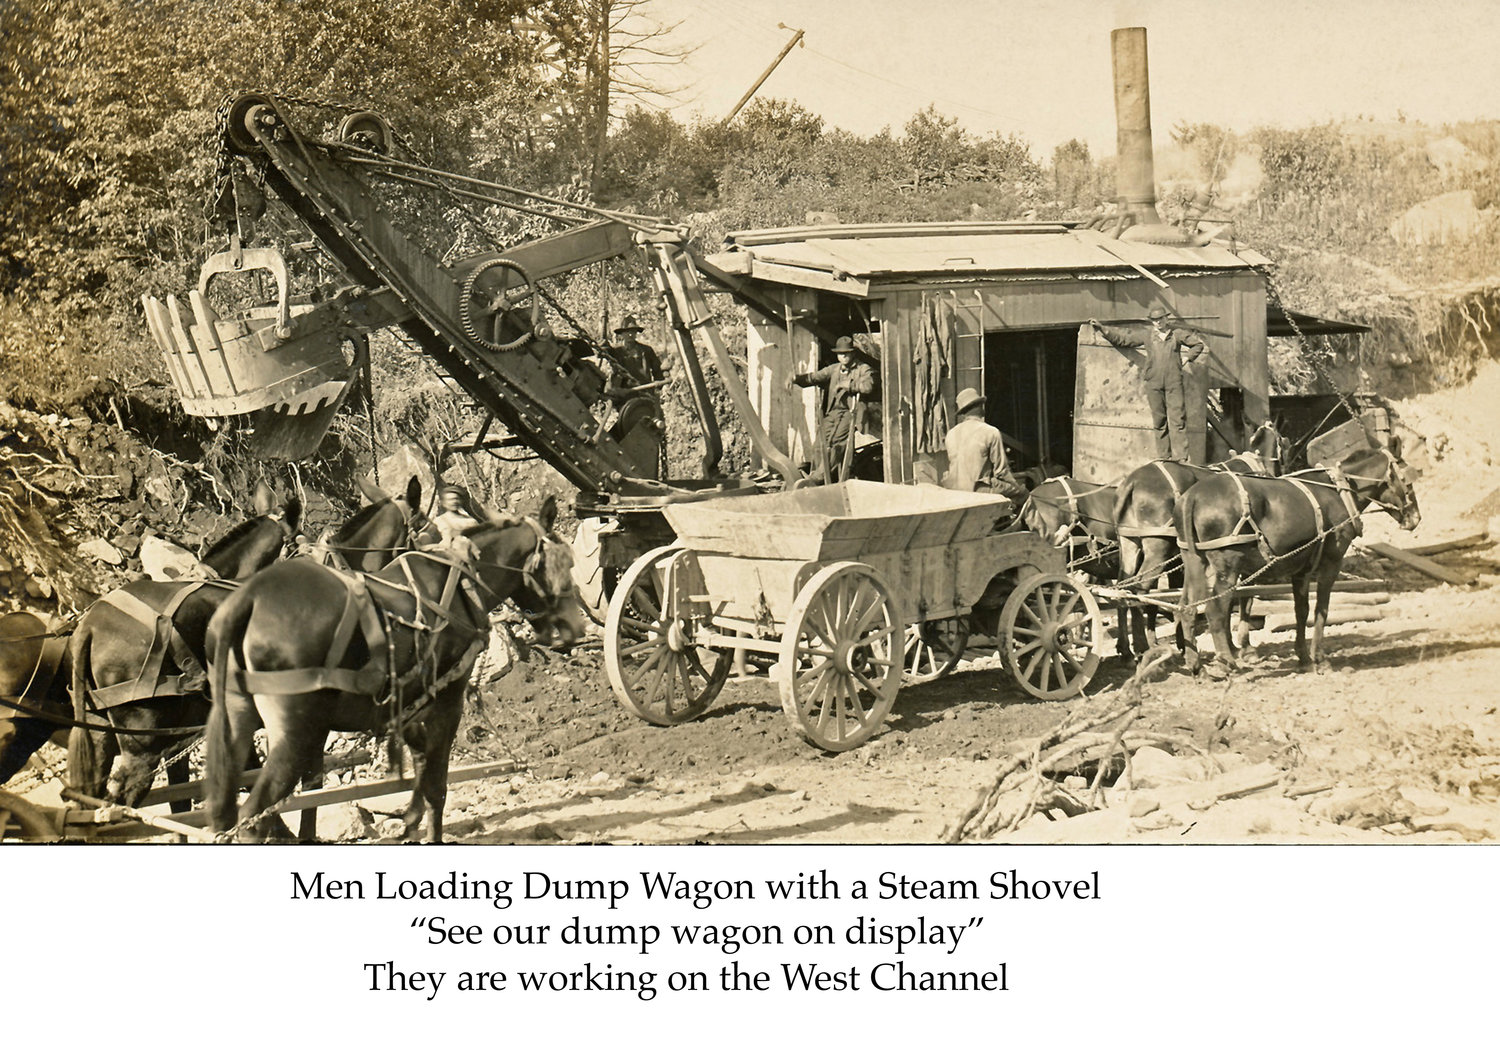 Loading a dump wagon with a steam shovel. They're working on the west channel of the Ashokan.